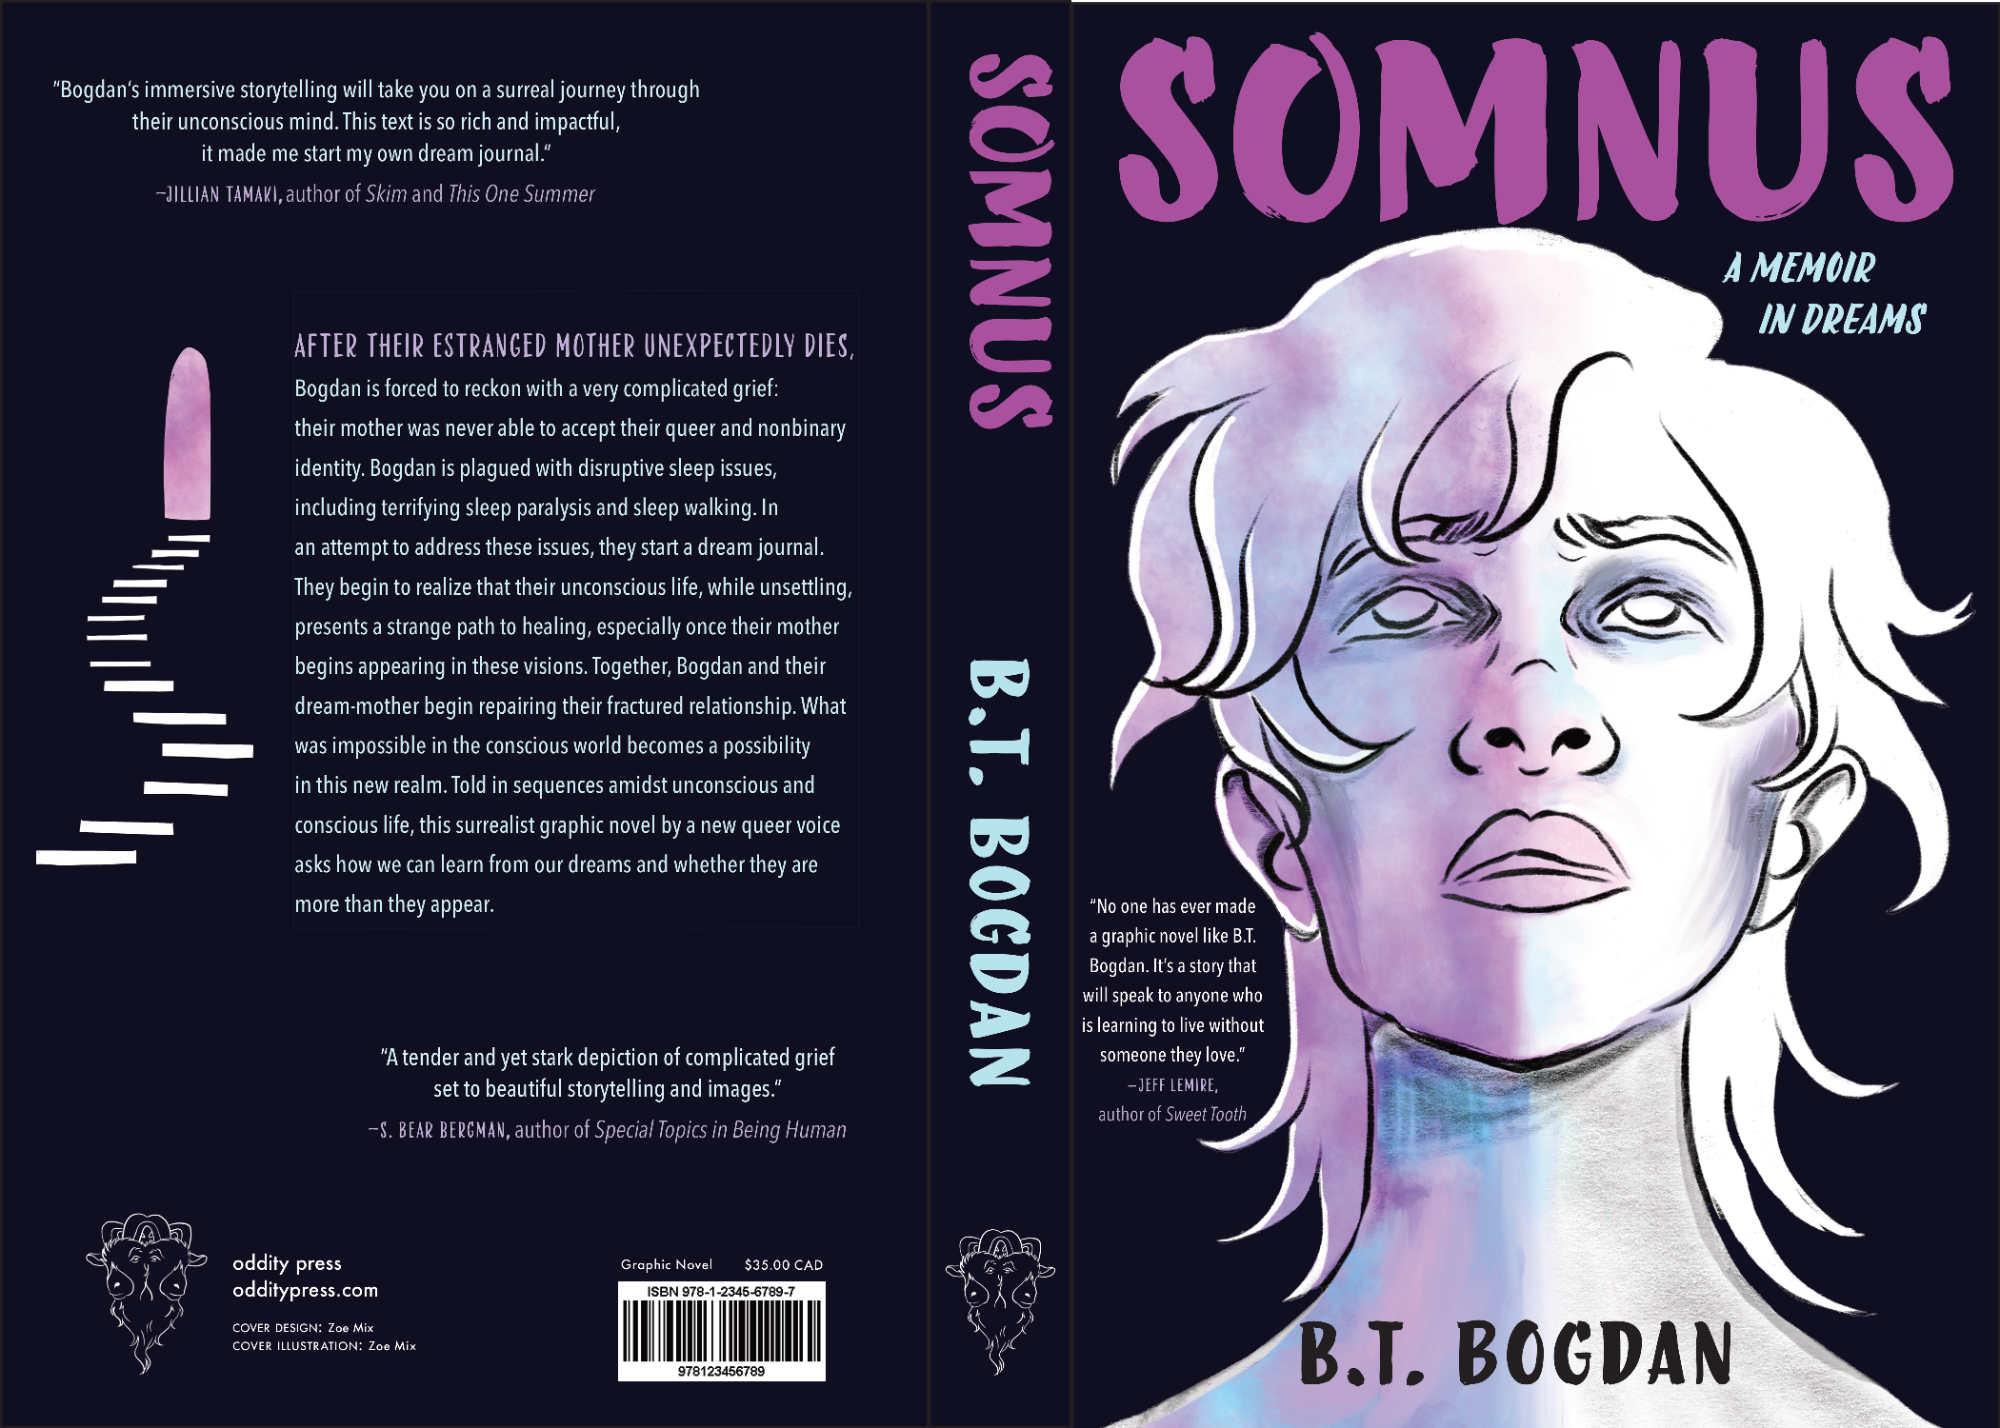 A black and purple book cover design featuring an illustration of a person's face in shades of purple and white. The book title reads, SOMNUS and includes a description of the memoir along with quotes and reviews about the graphic novel. The author is B.T. Bogdan, and the the story follows Bodgan personal grief following their estranged mother's unexpected death.  